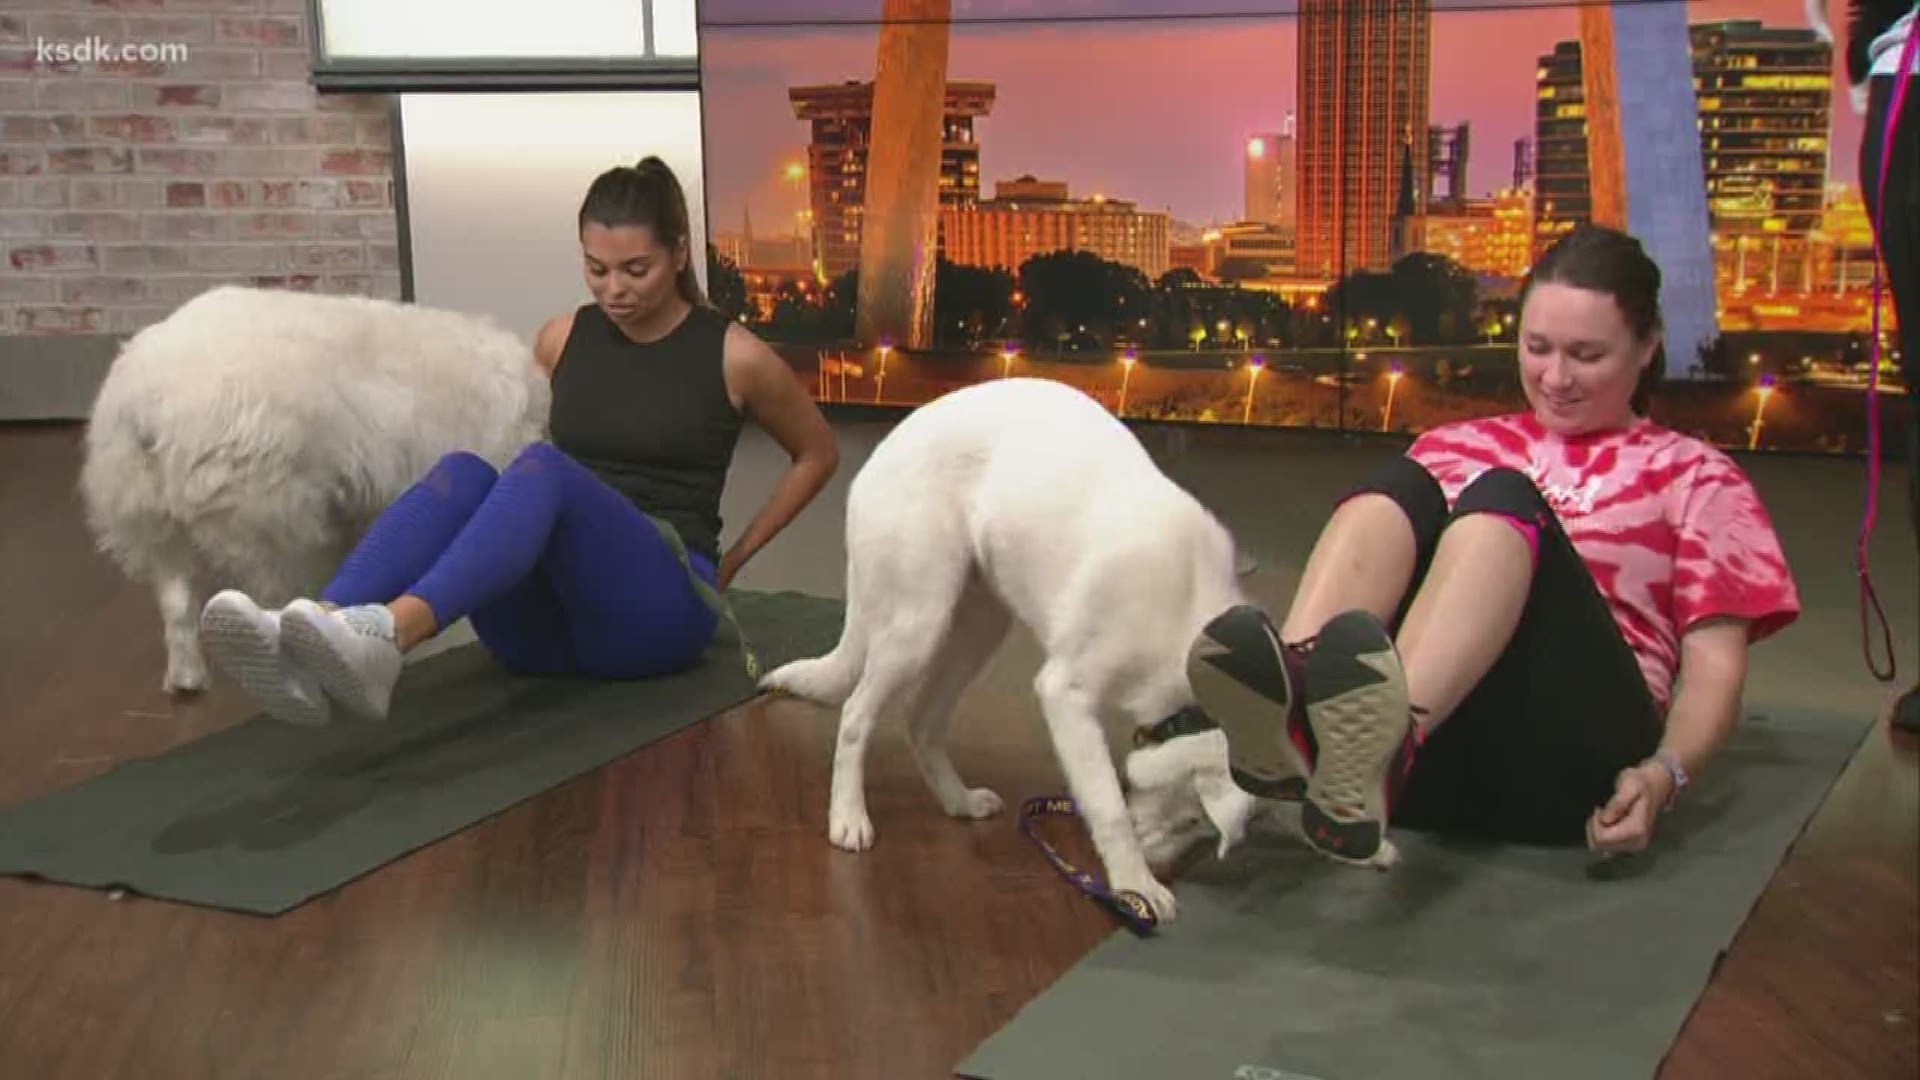 Pilates with Puppies is Friday, January 10, 2020.